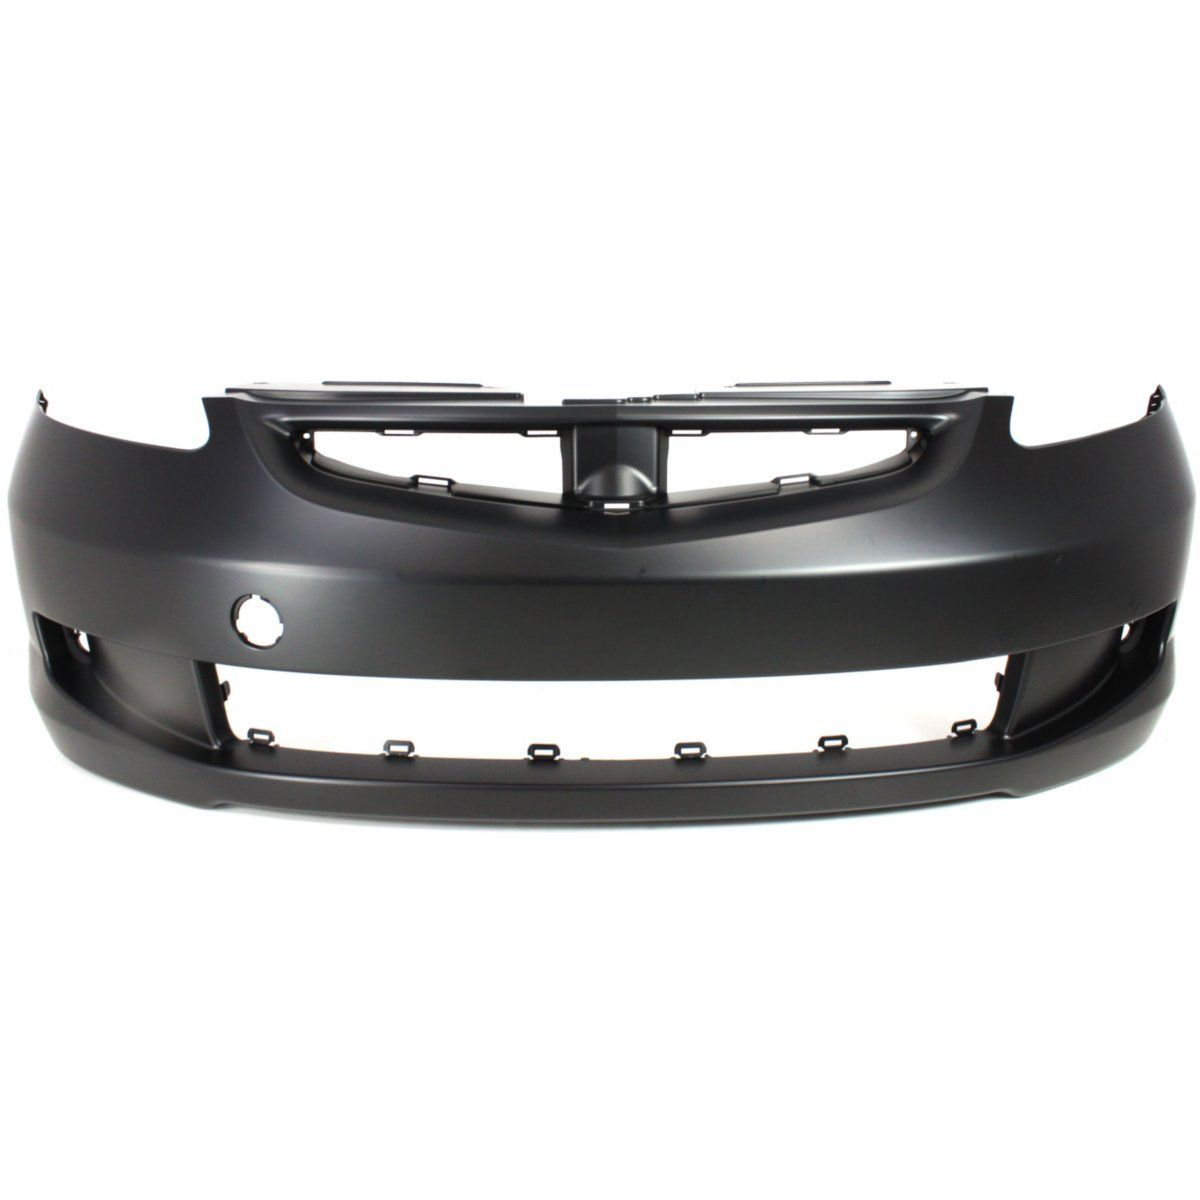 2007-2008 HONDA FIT Front Bumper Cover base/DX/LX model Painted to Match